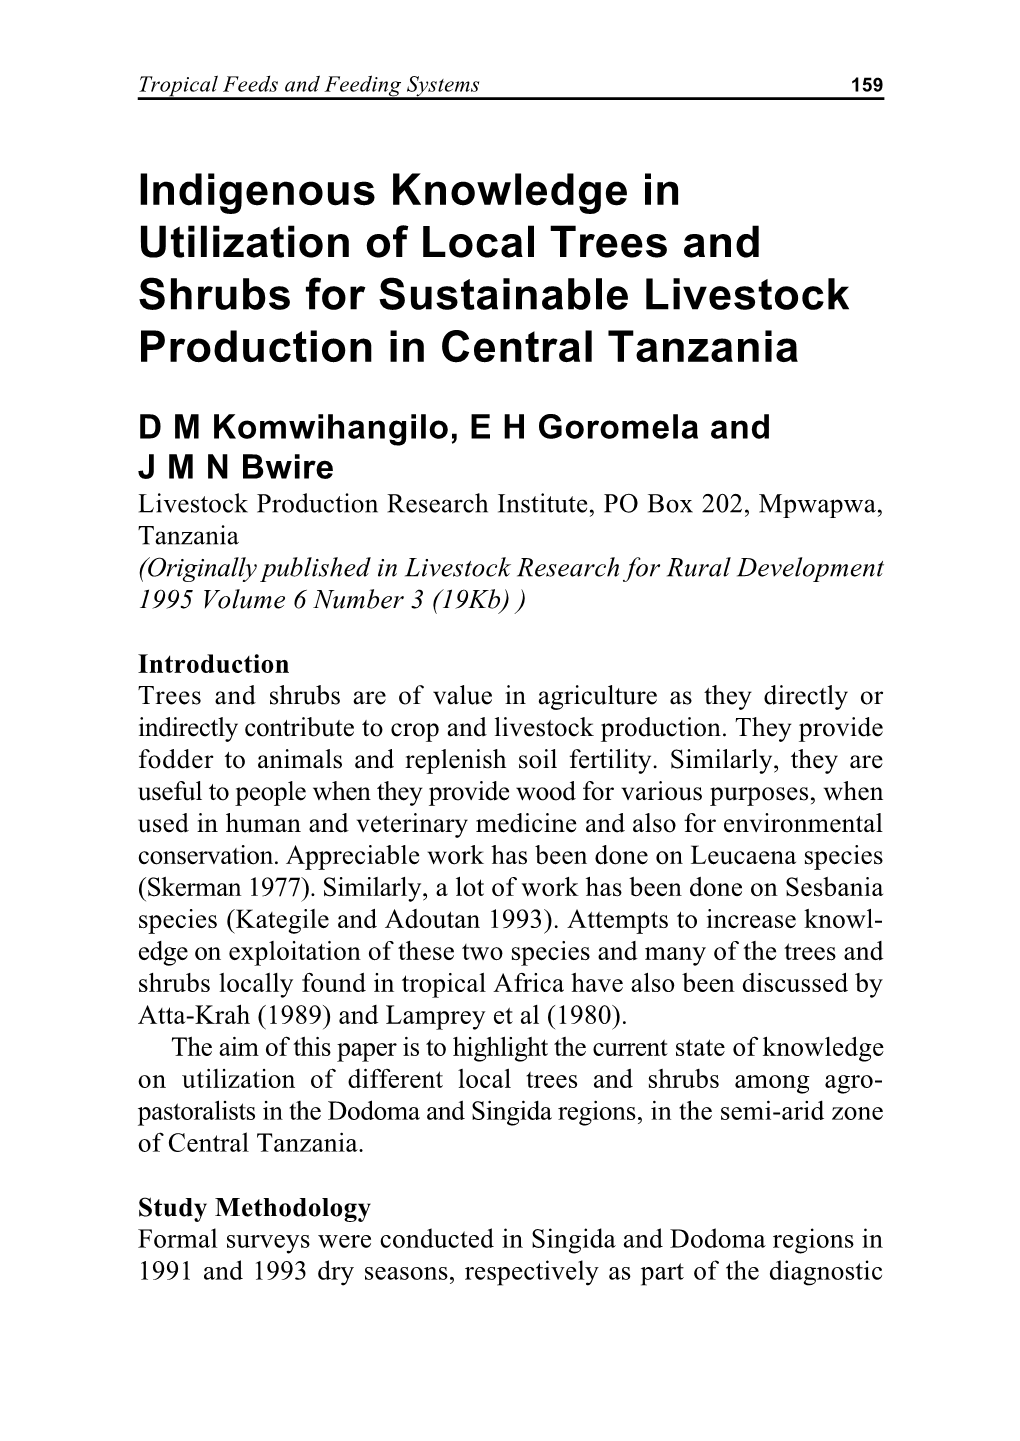 Indigenous Knowledge in Utilization of Local Trees and Shrubs for Sustainable Livestock Production in Central Tanzania